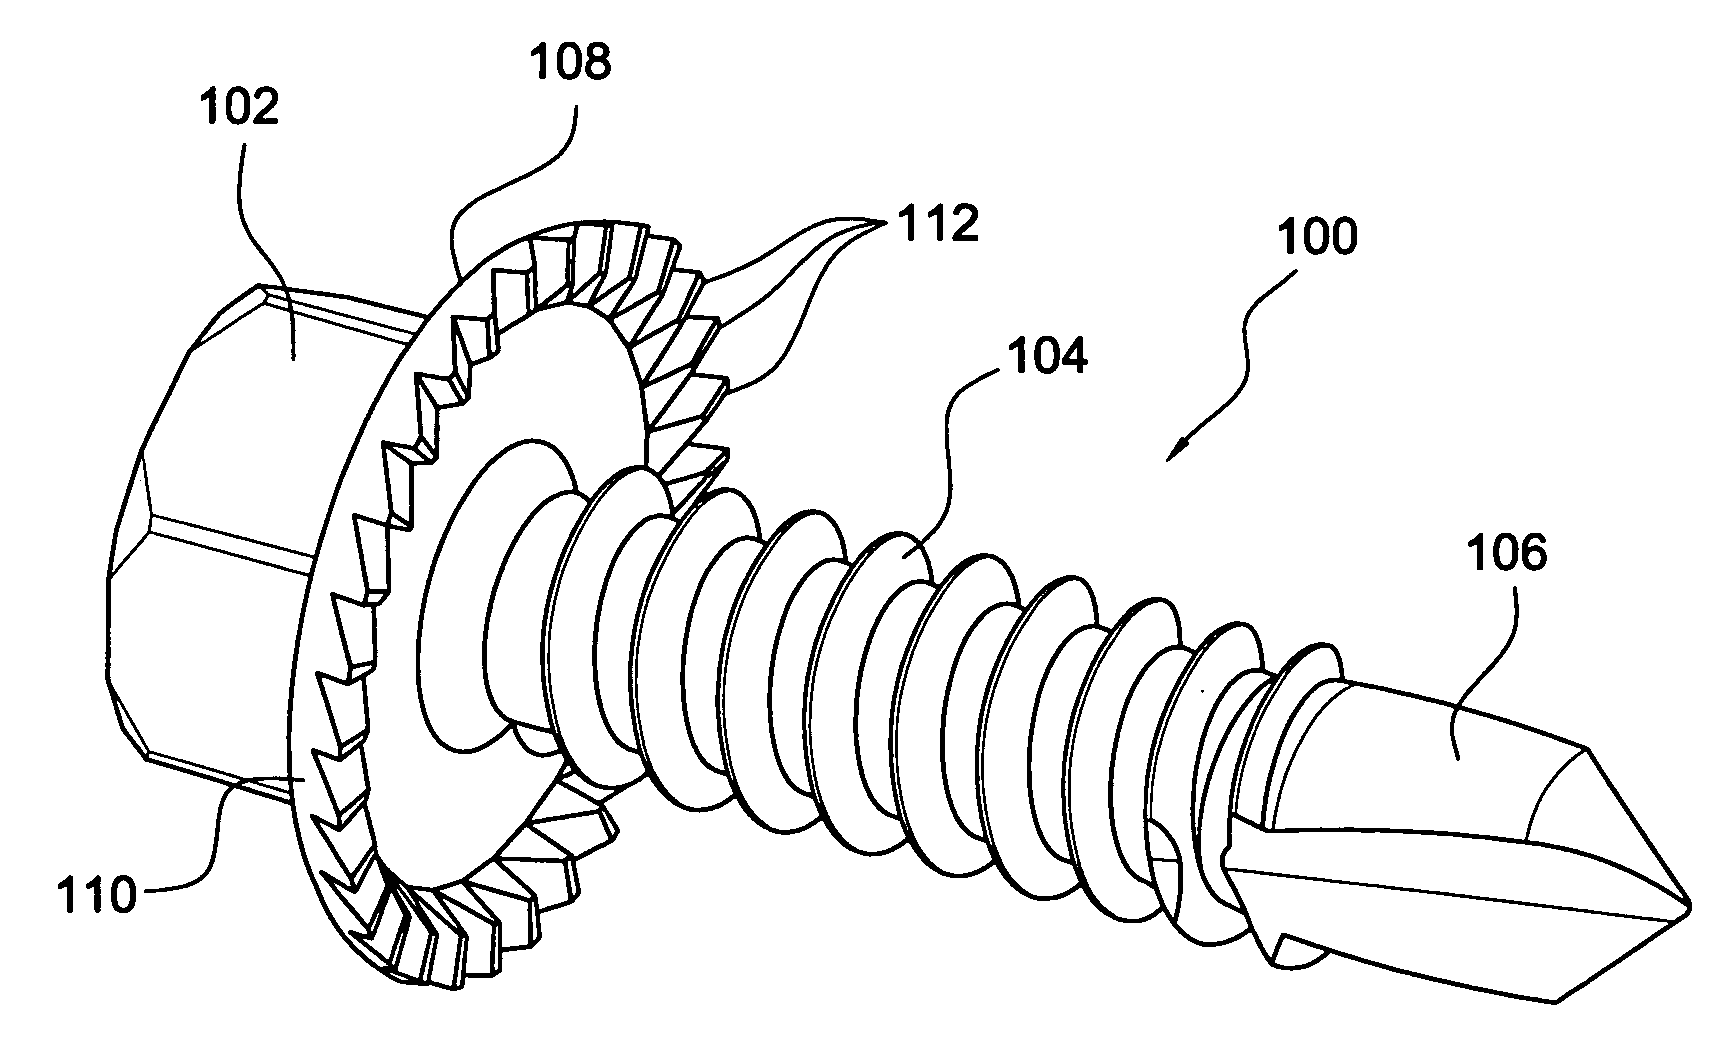 Self-counterboring, screw-threaded headed fastener with enlarged flanged portion or wings having cutting teeth thereon, and cutting wrench/screw gun sockets